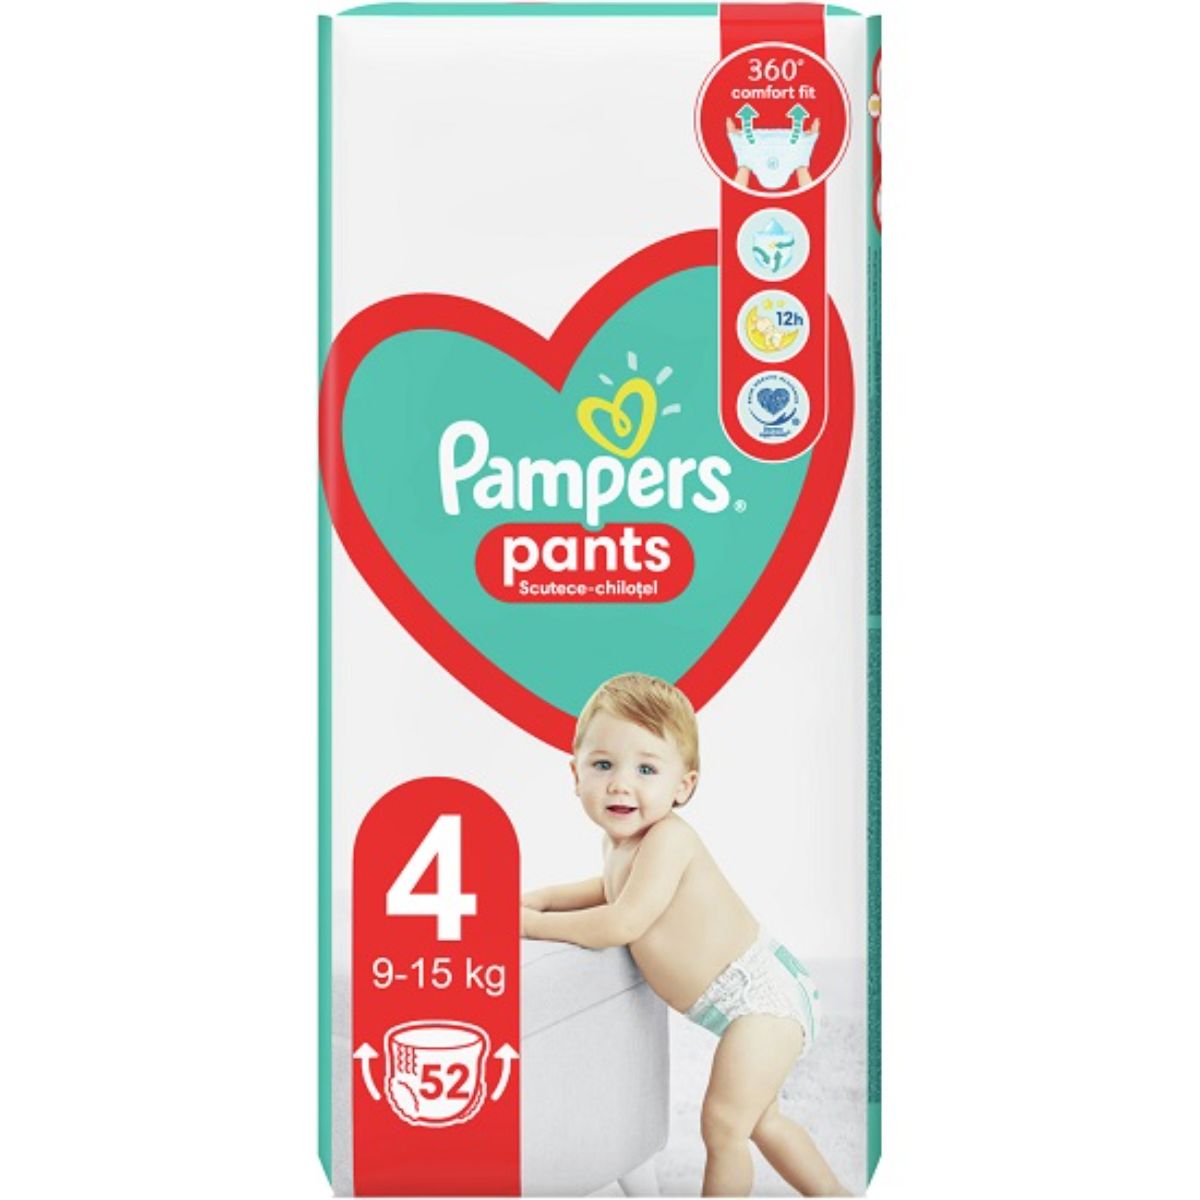 Scutece Pampers, 4 Chilotel Act Baby 9-15 kg, 52 buc 9-15 imagine 2022 protejamcopilaria.ro